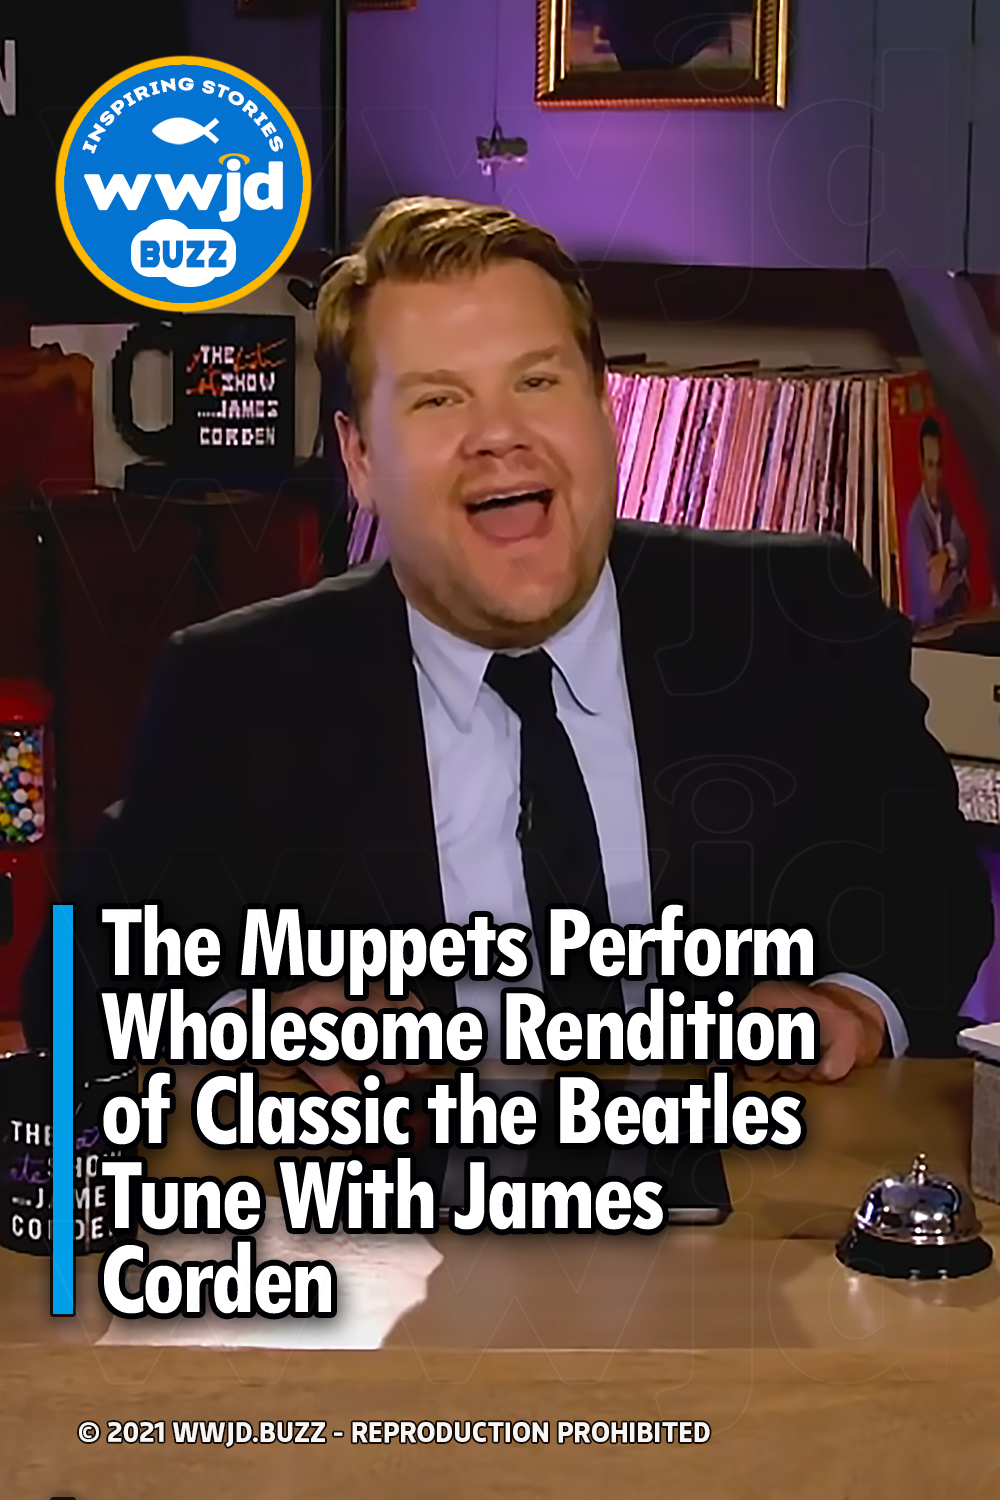 The Muppets Perform Wholesome Rendition of Classic the Beatles Tune With James Corden